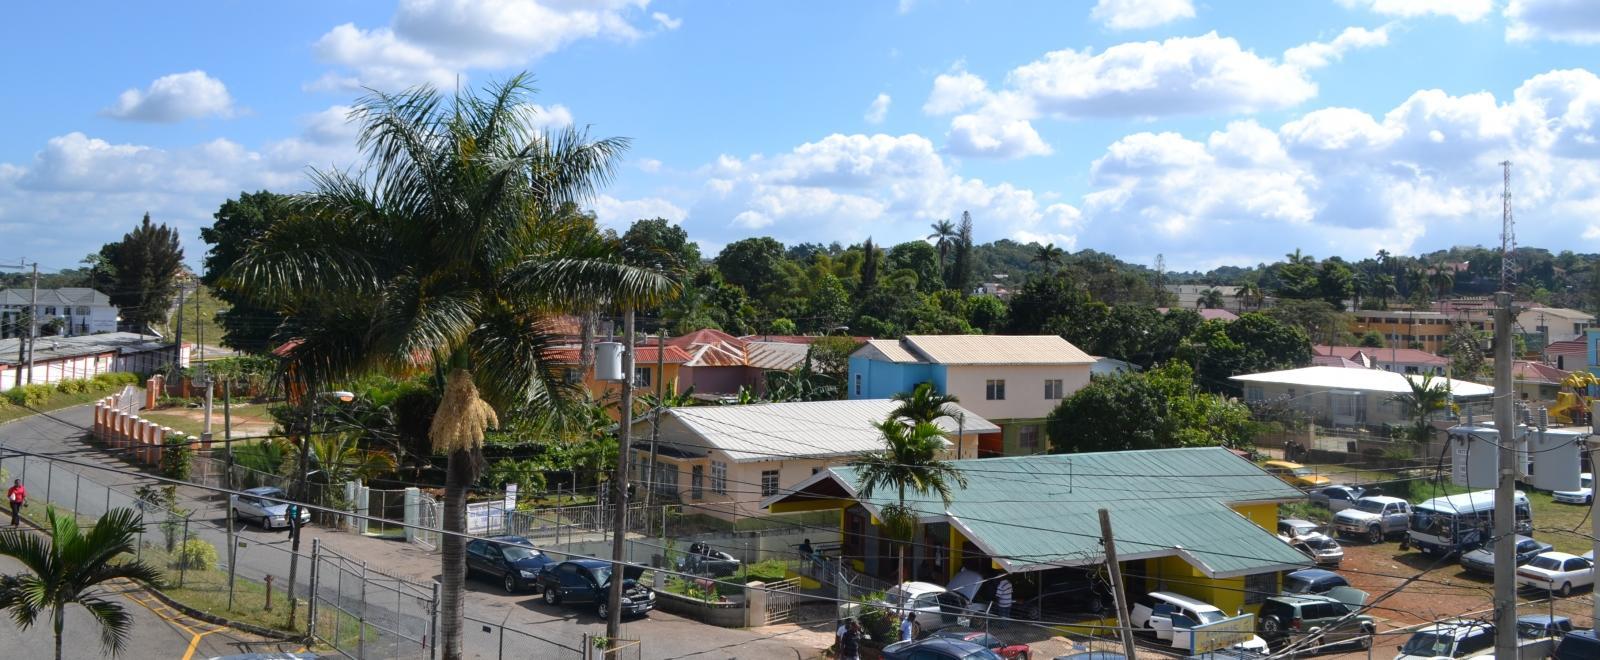 A colourful neighbourhood seen while volunteering in Jamaica with Projects Abroad.